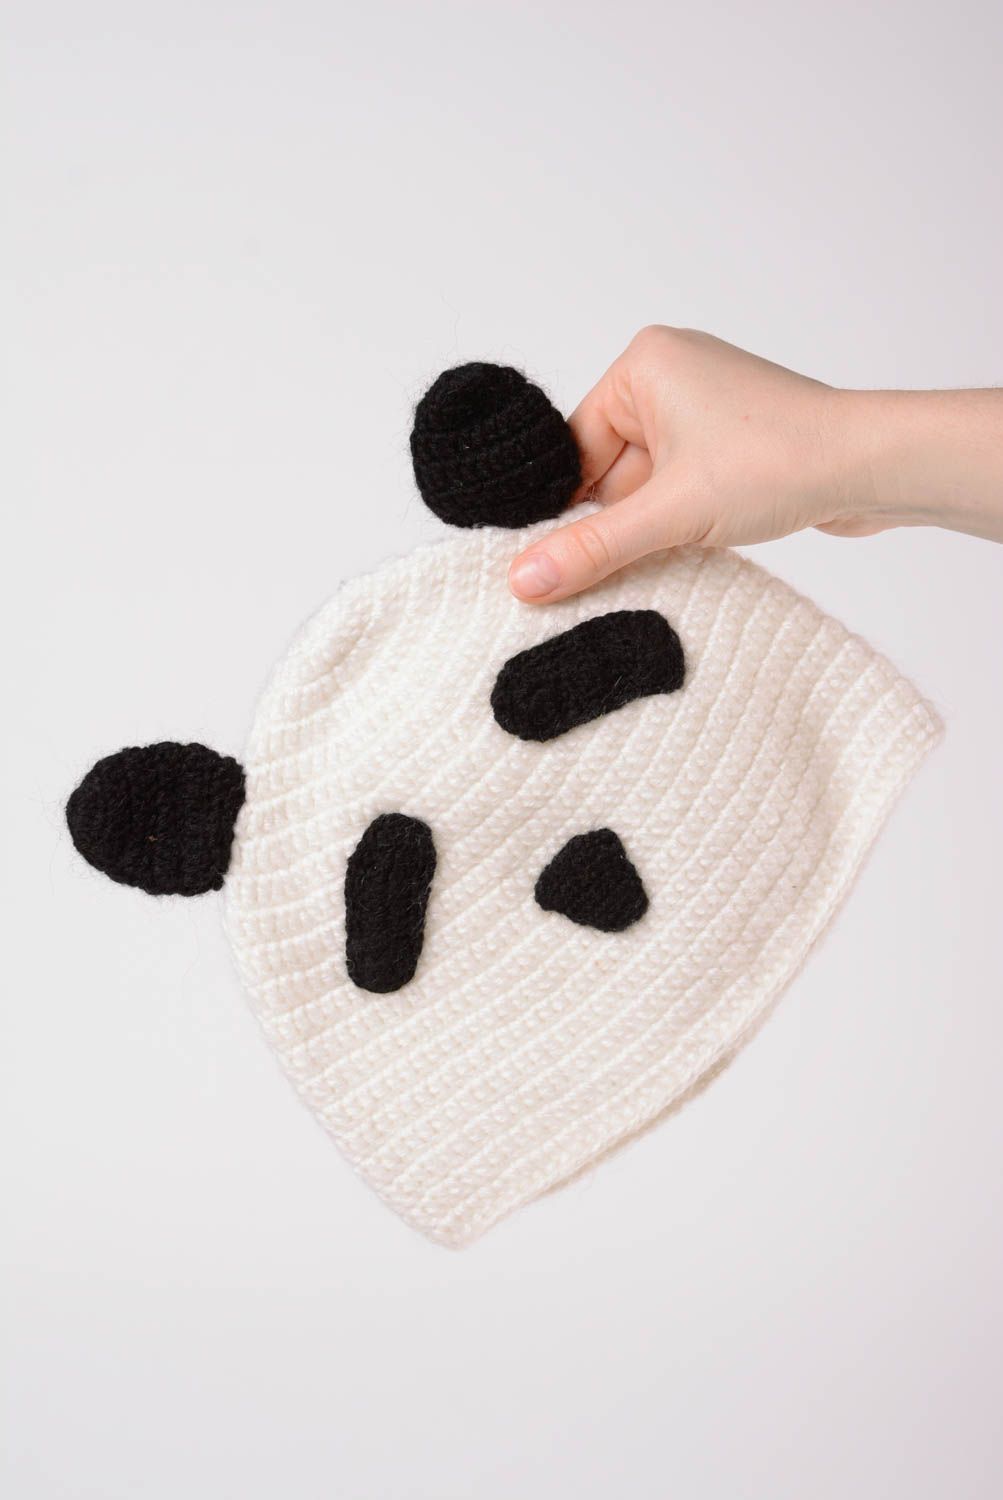 Handmade funny animal hat knitted of woolen threads Panda for women and kids photo 5